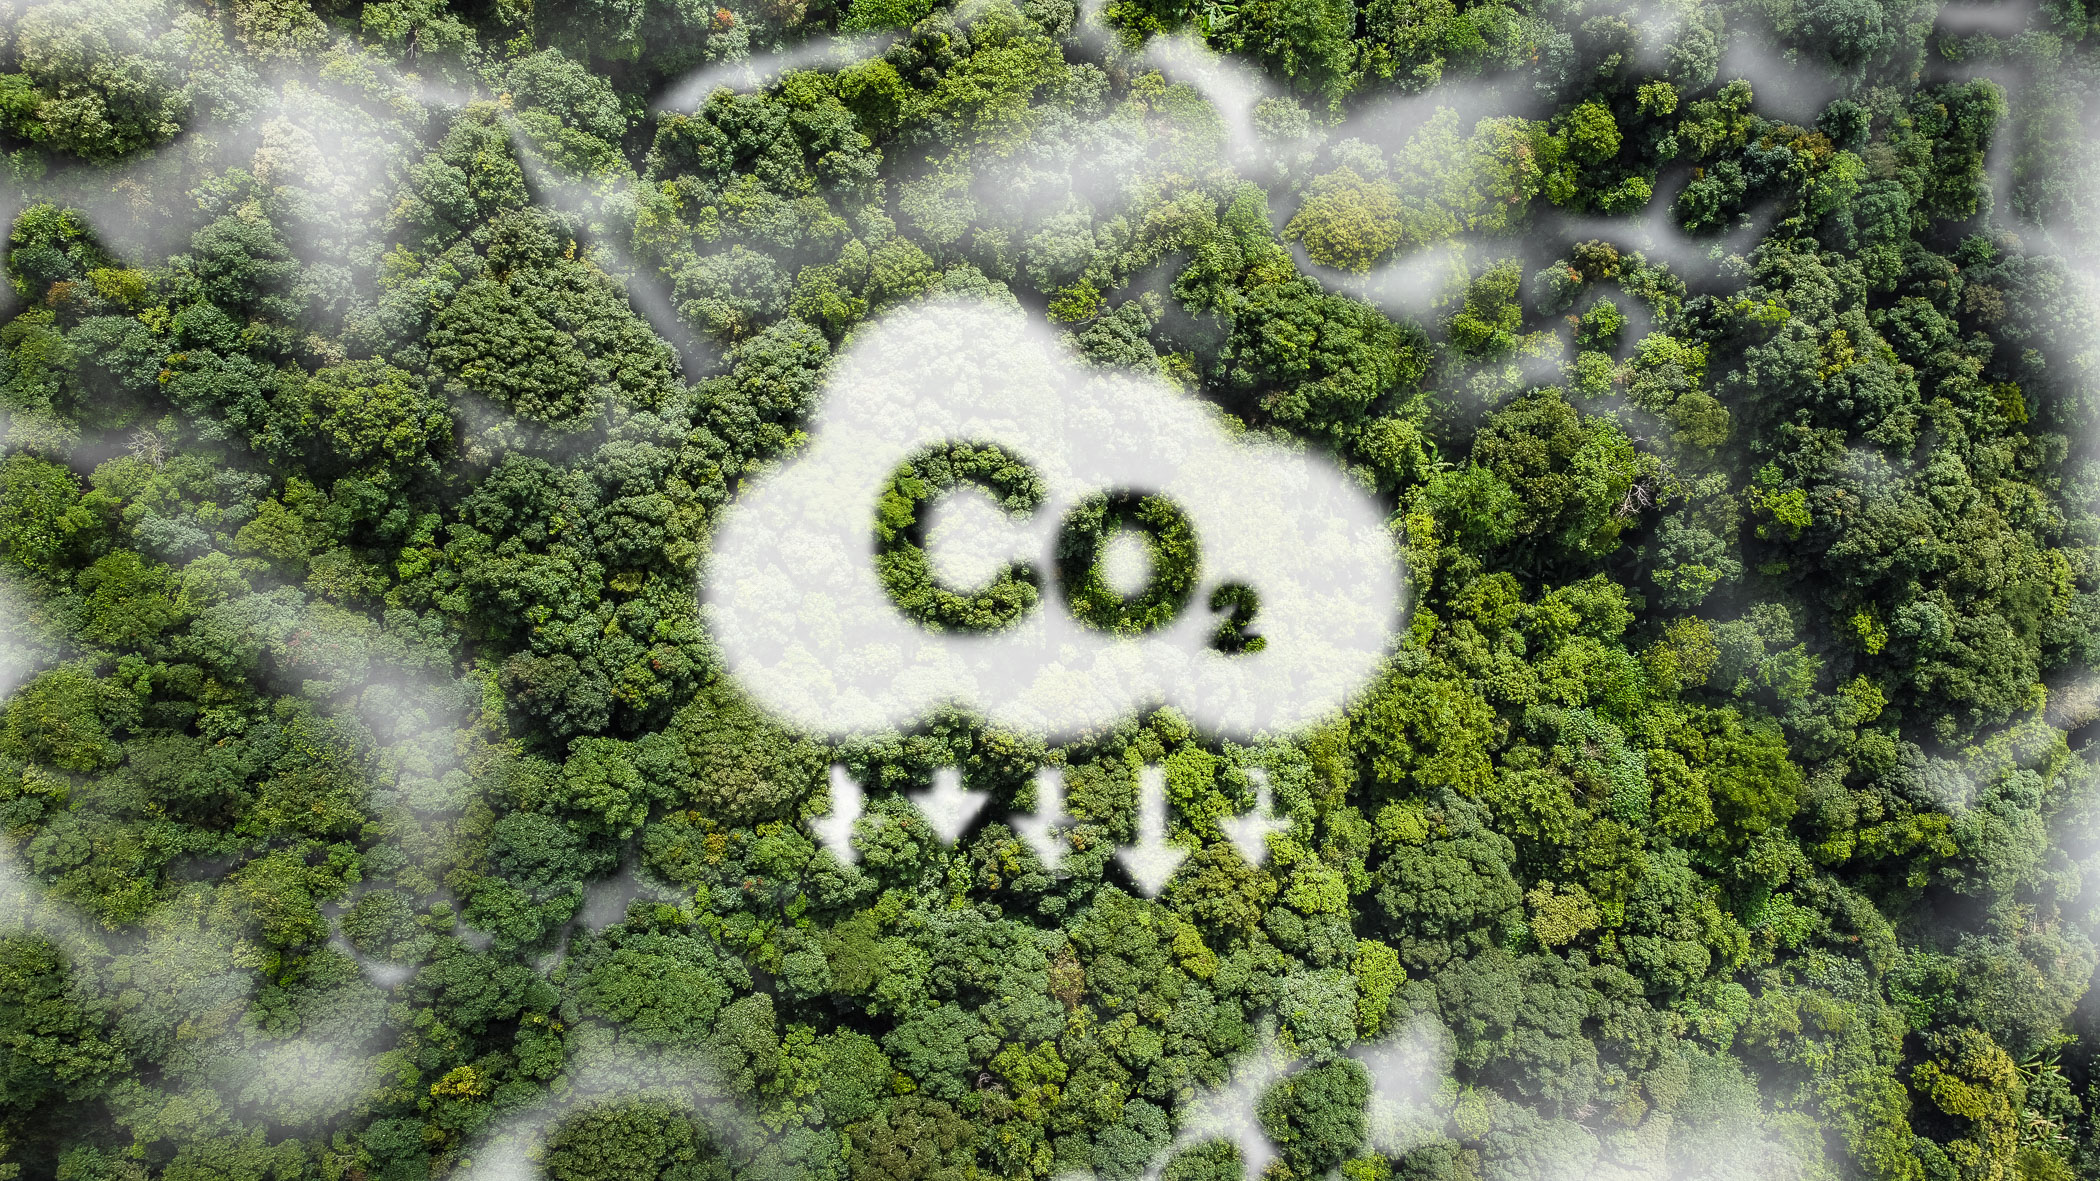 co2 cloud with arrows downward above forest